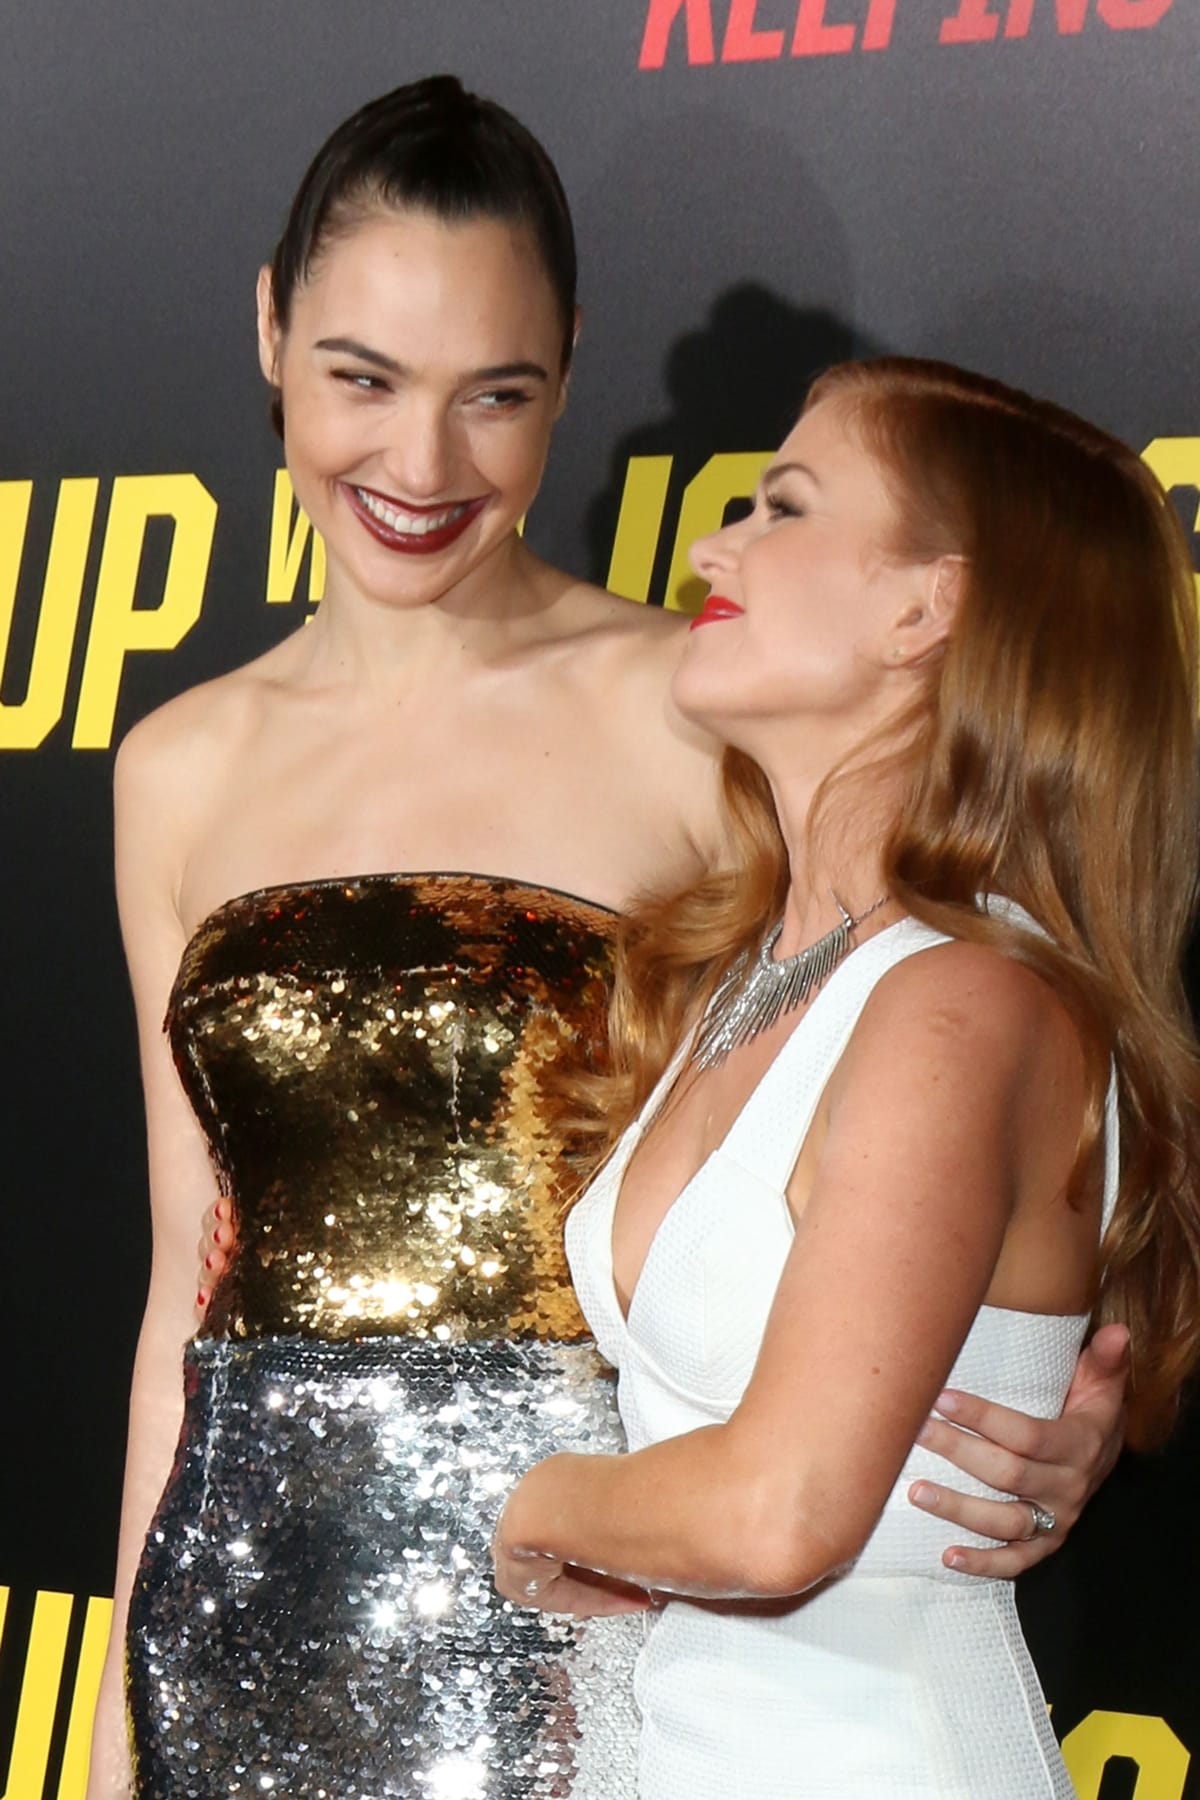 Gal Gadot stands at 5ft 9 ¼ (175.9 cm), while Isla Fisher is notably shorter at 5ft 2 (157.5 cm), indicating a height difference of approximately 7 inches (18.4 cm)